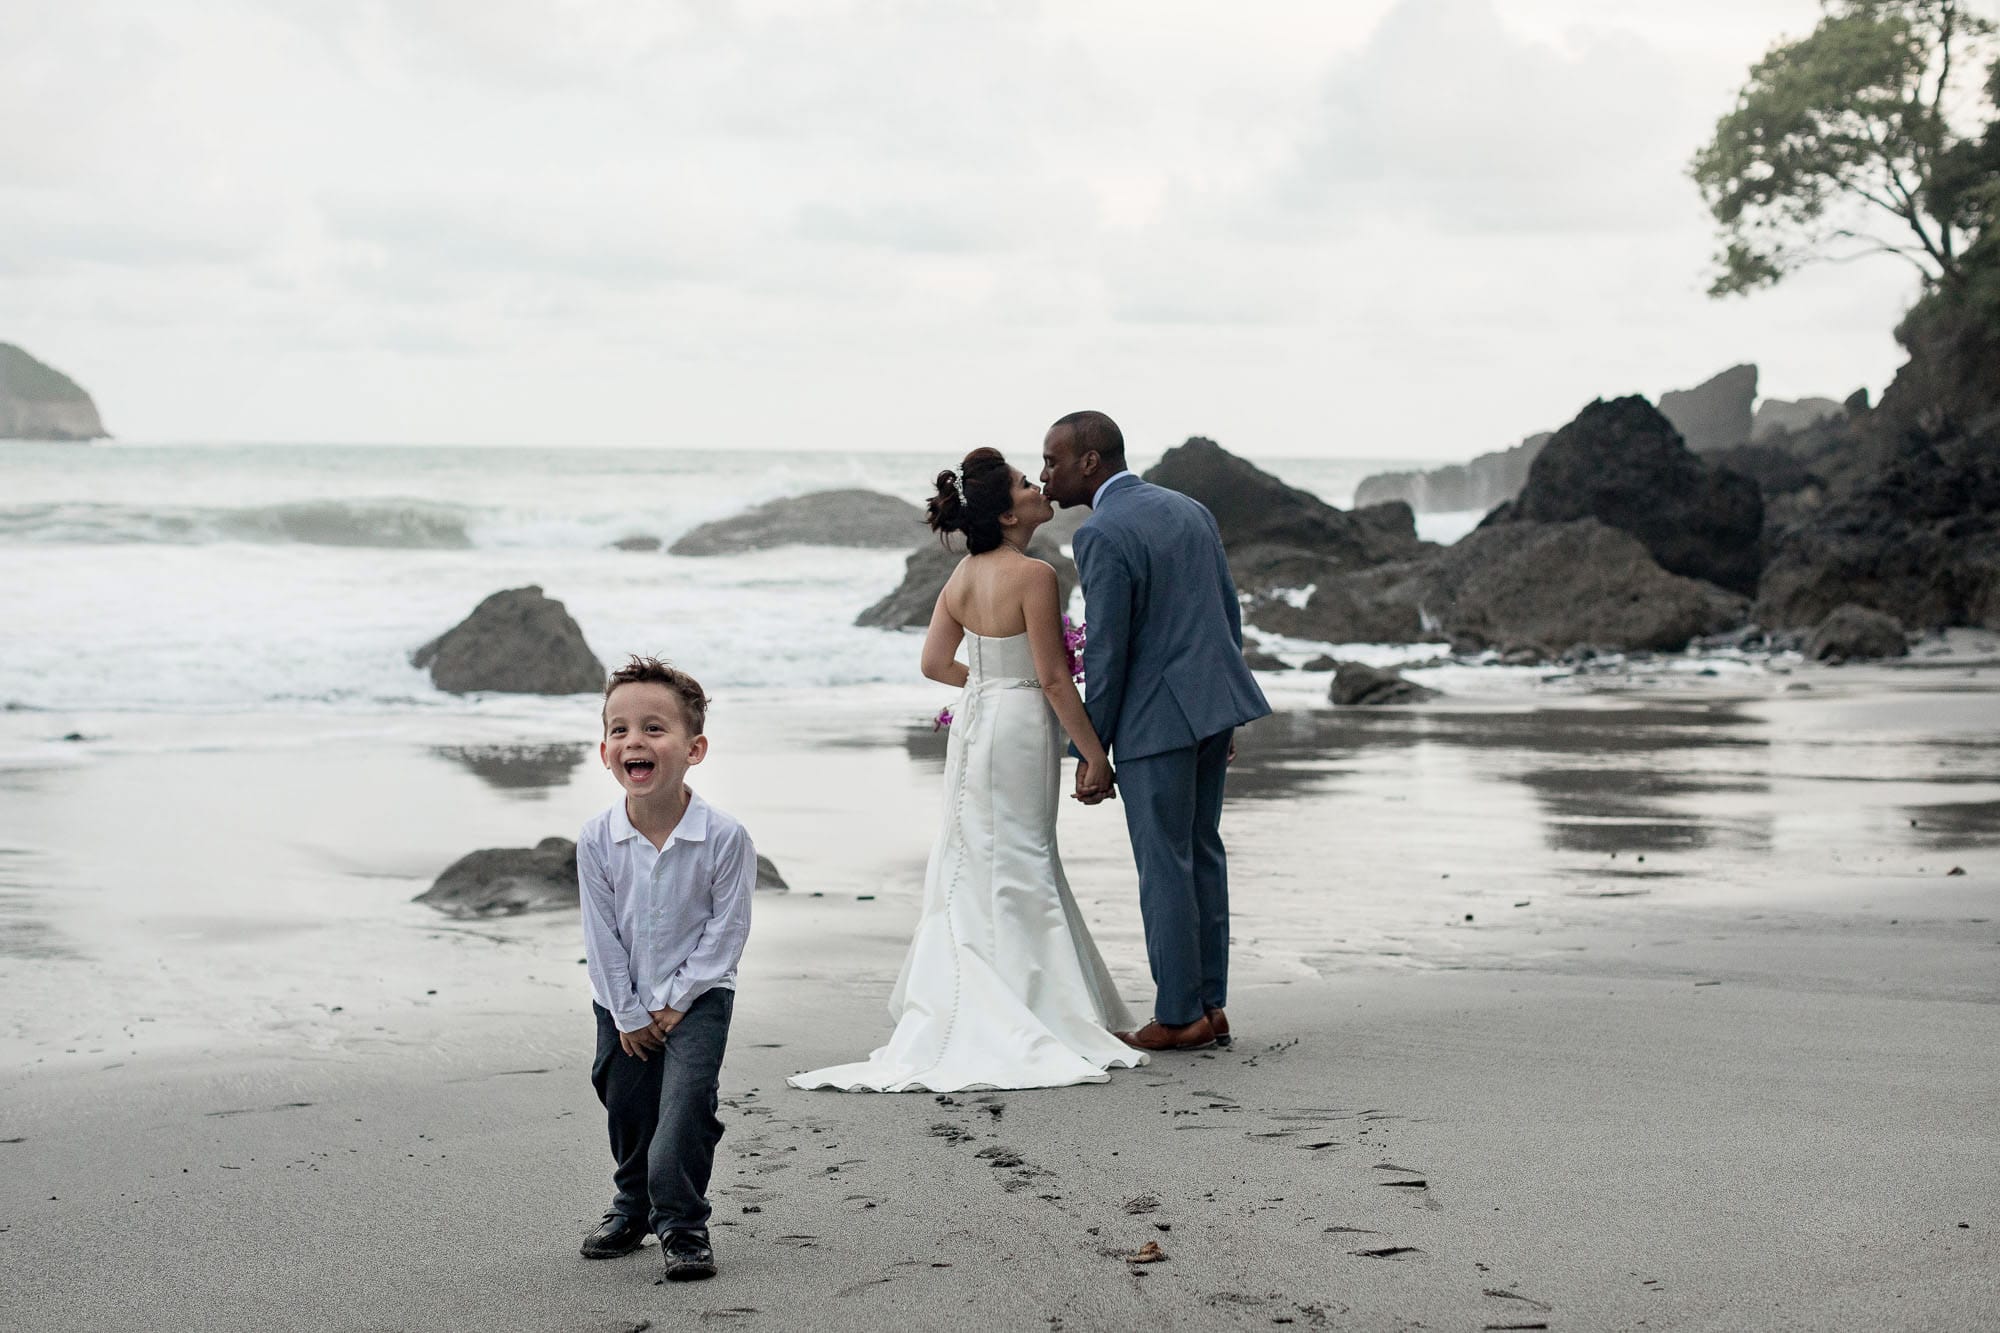 The bride and groom sneak a kiss on the beach and scandalize a little wedding guest!